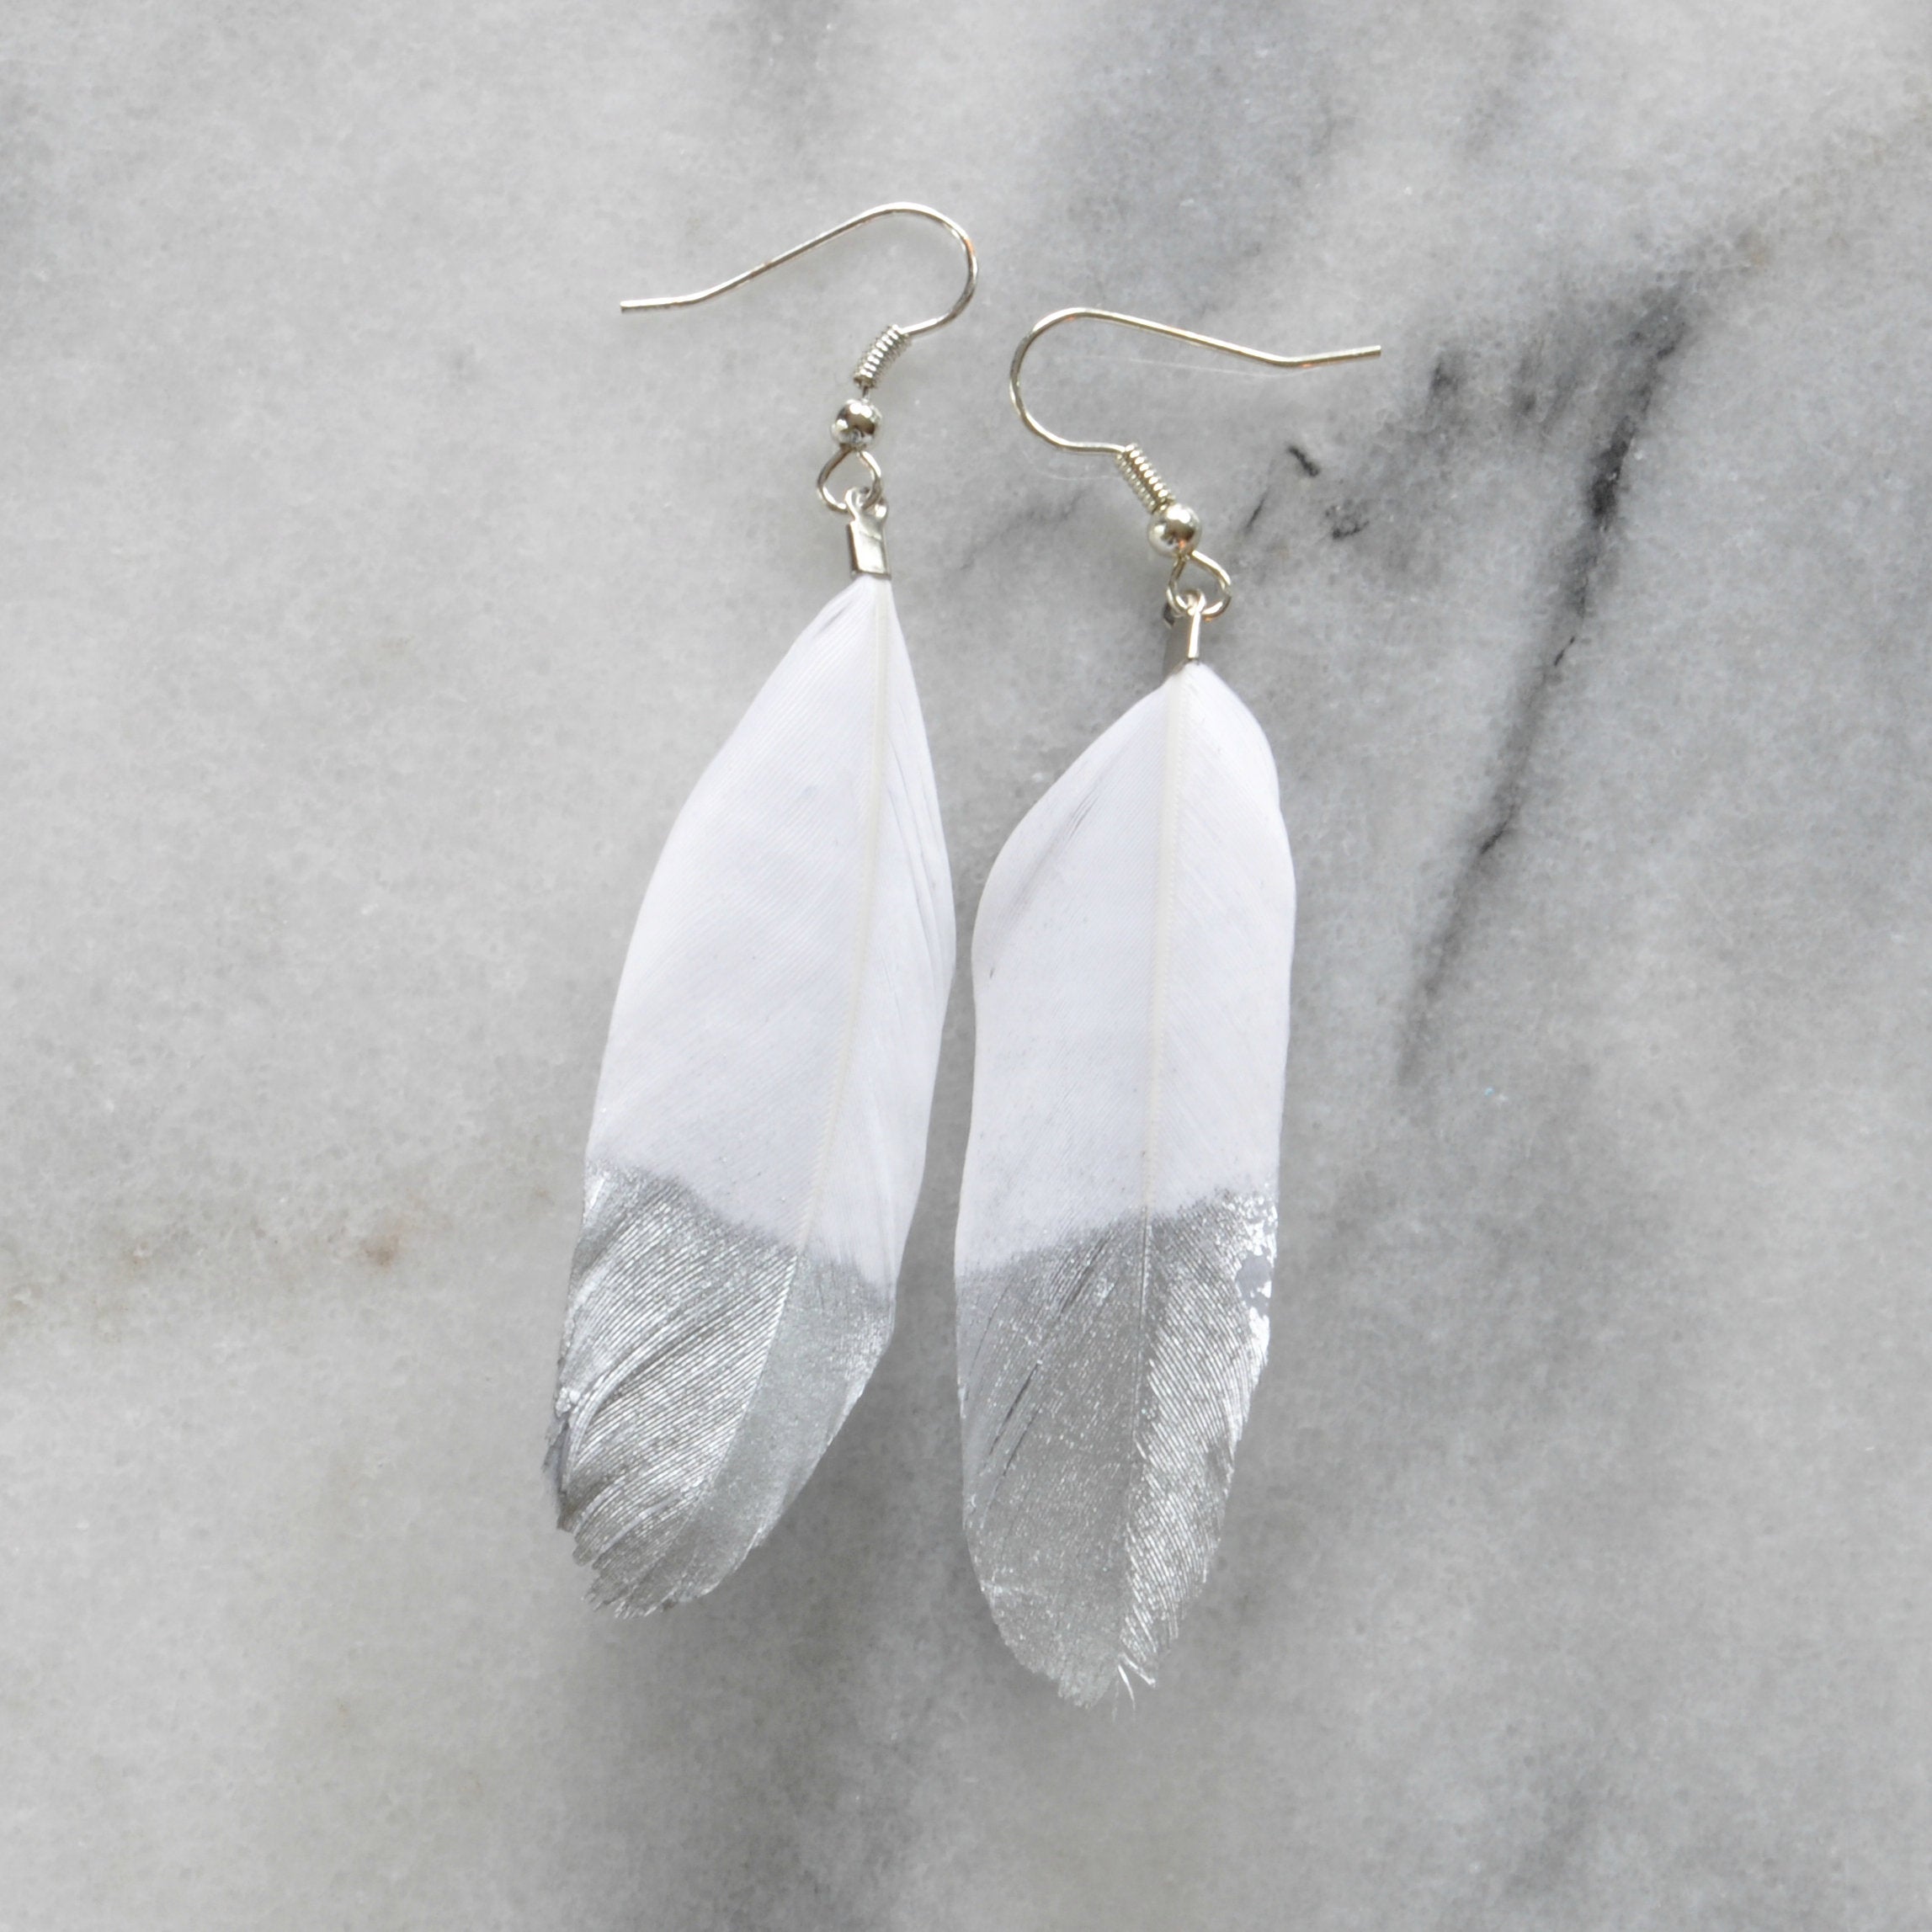 Libby & Smee Gold and Silver Feather Earrings in white with silver,  still life 